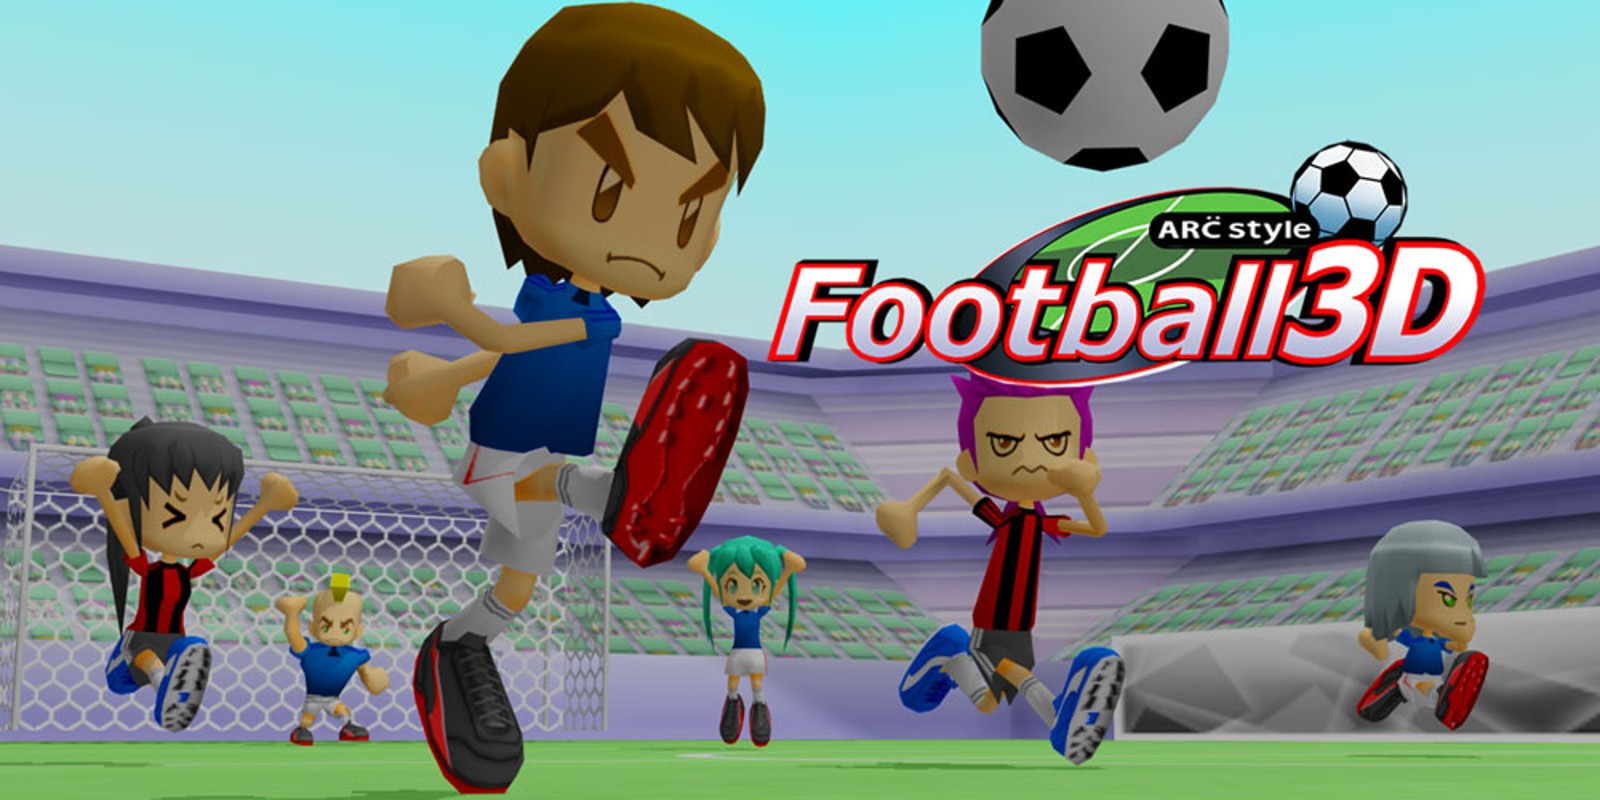 ARC STYLE: Football 3D | Nintendo 3DS download software | Games | Nintendo